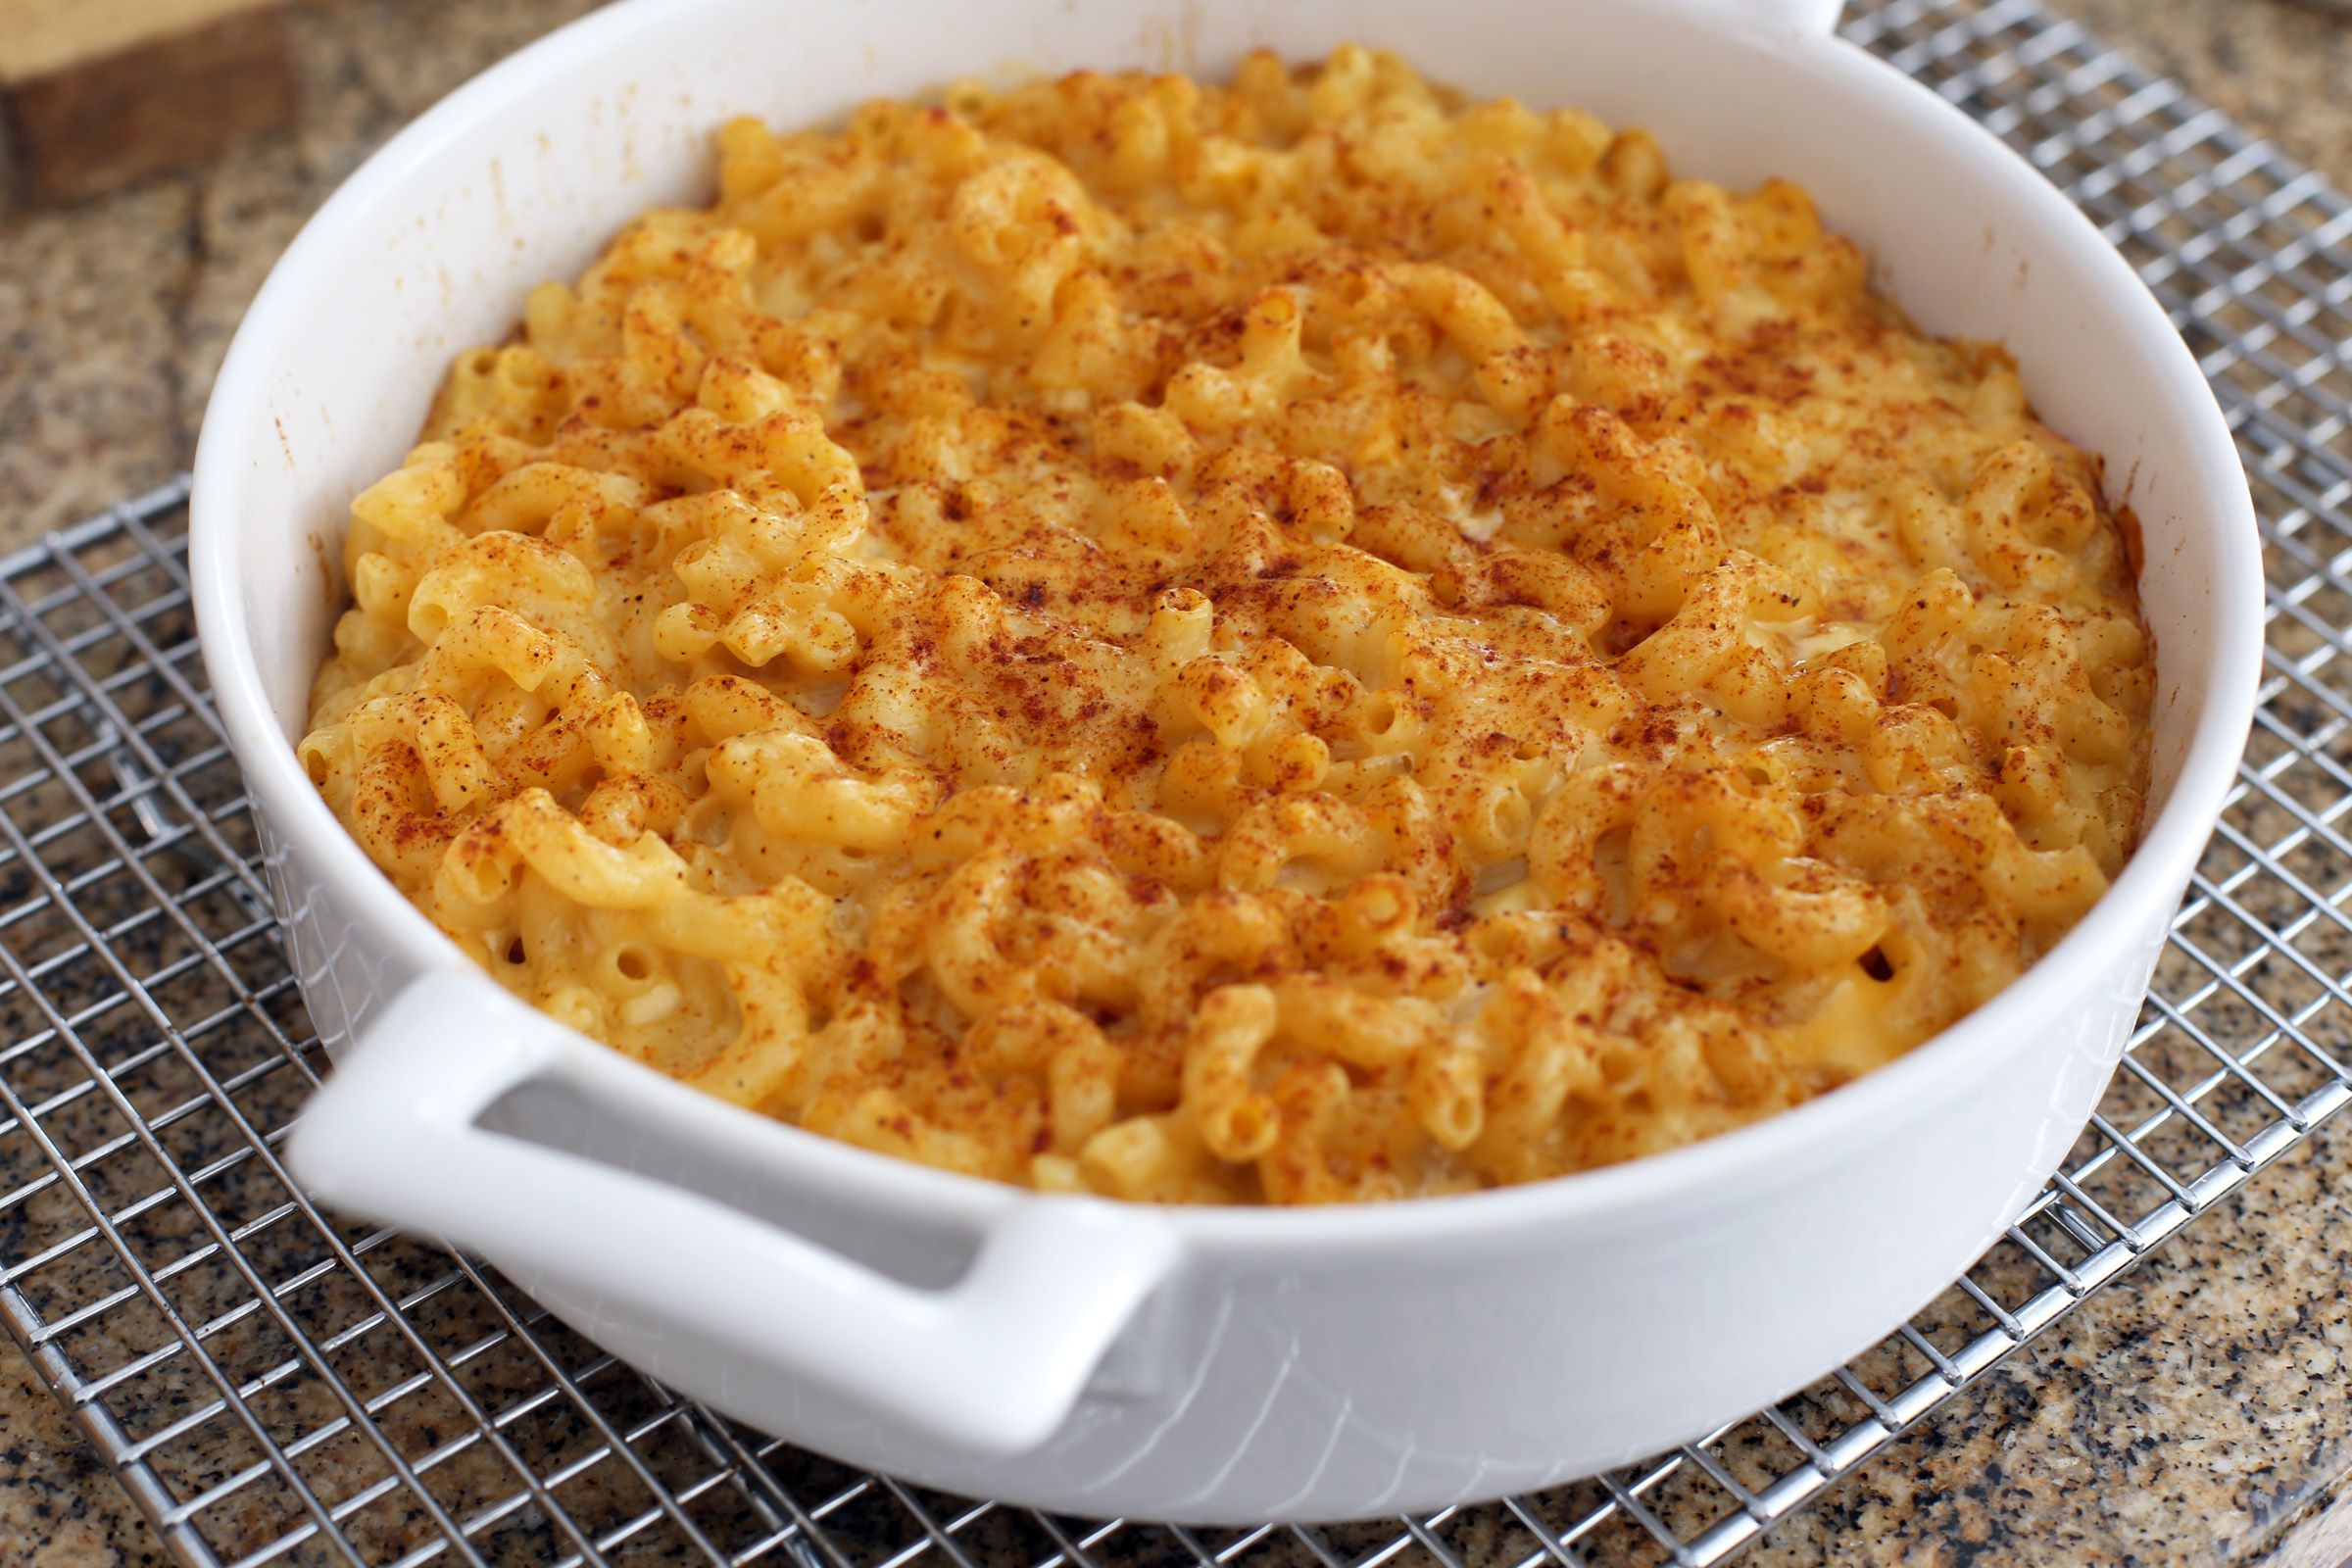 Sandy's Macaroni and Cheese Recipe With 3 Cheeses